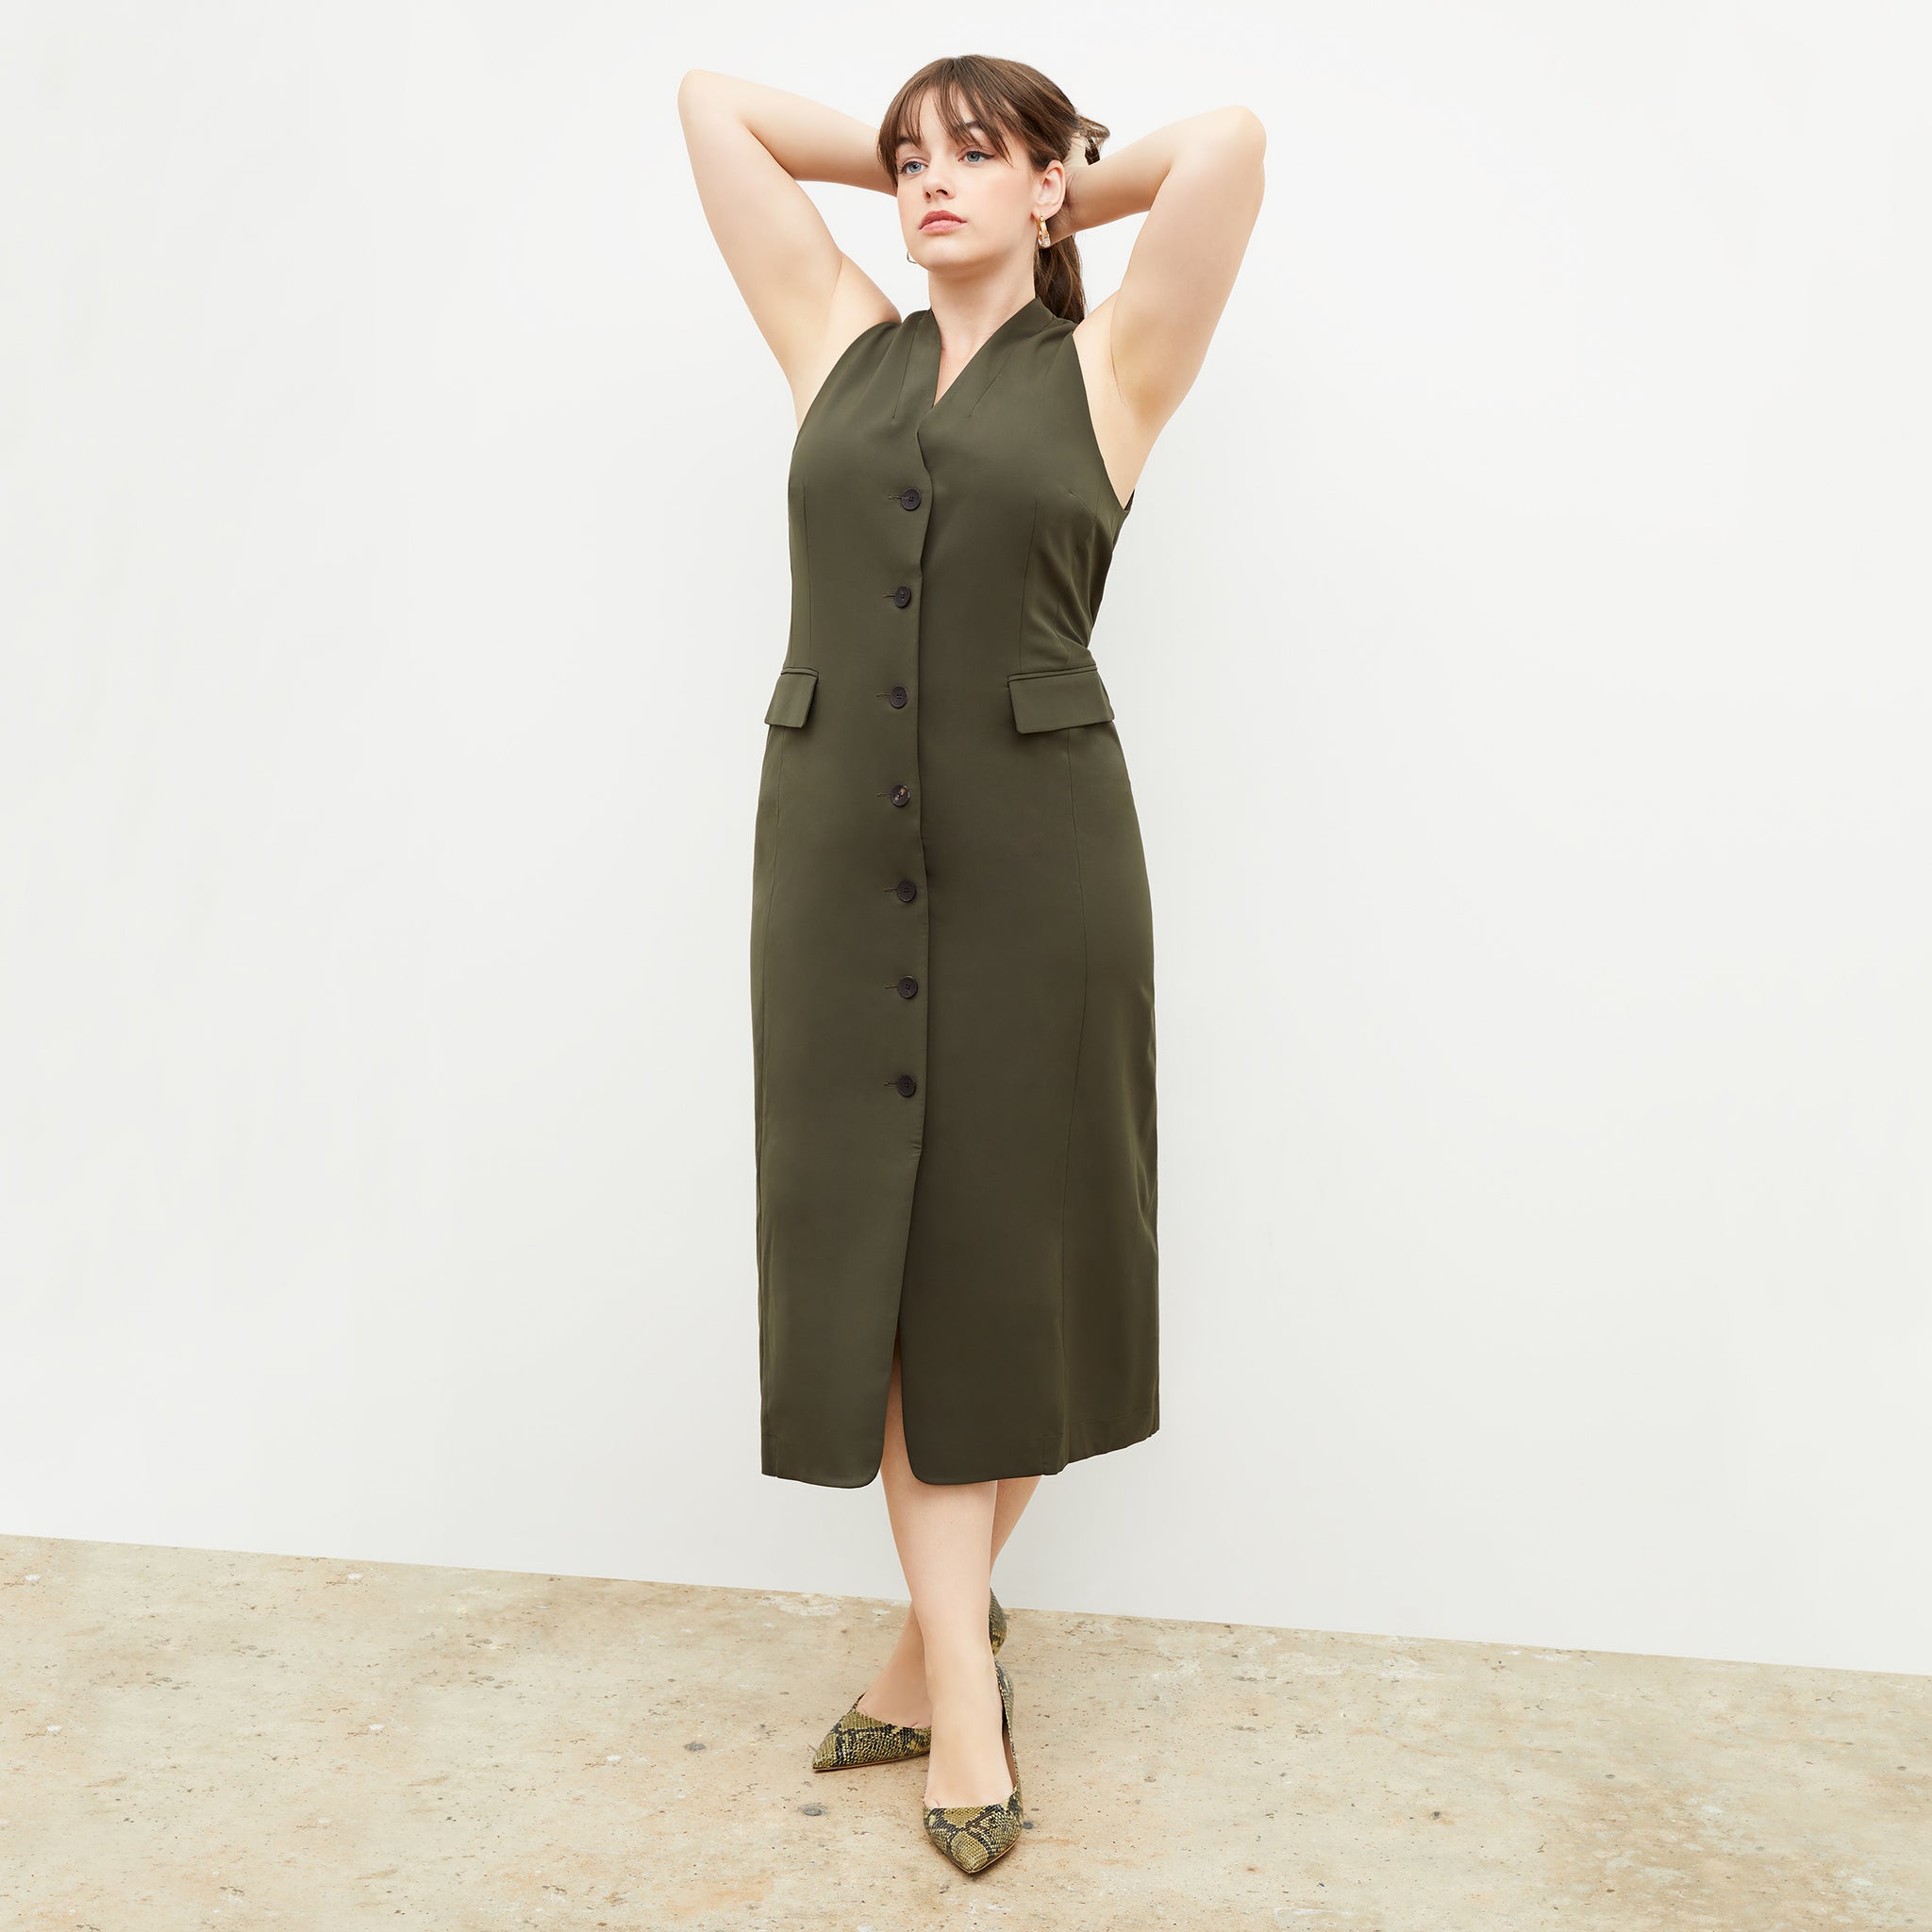 Back image of a woman wearing the Cassandra dress in origamitech in olive